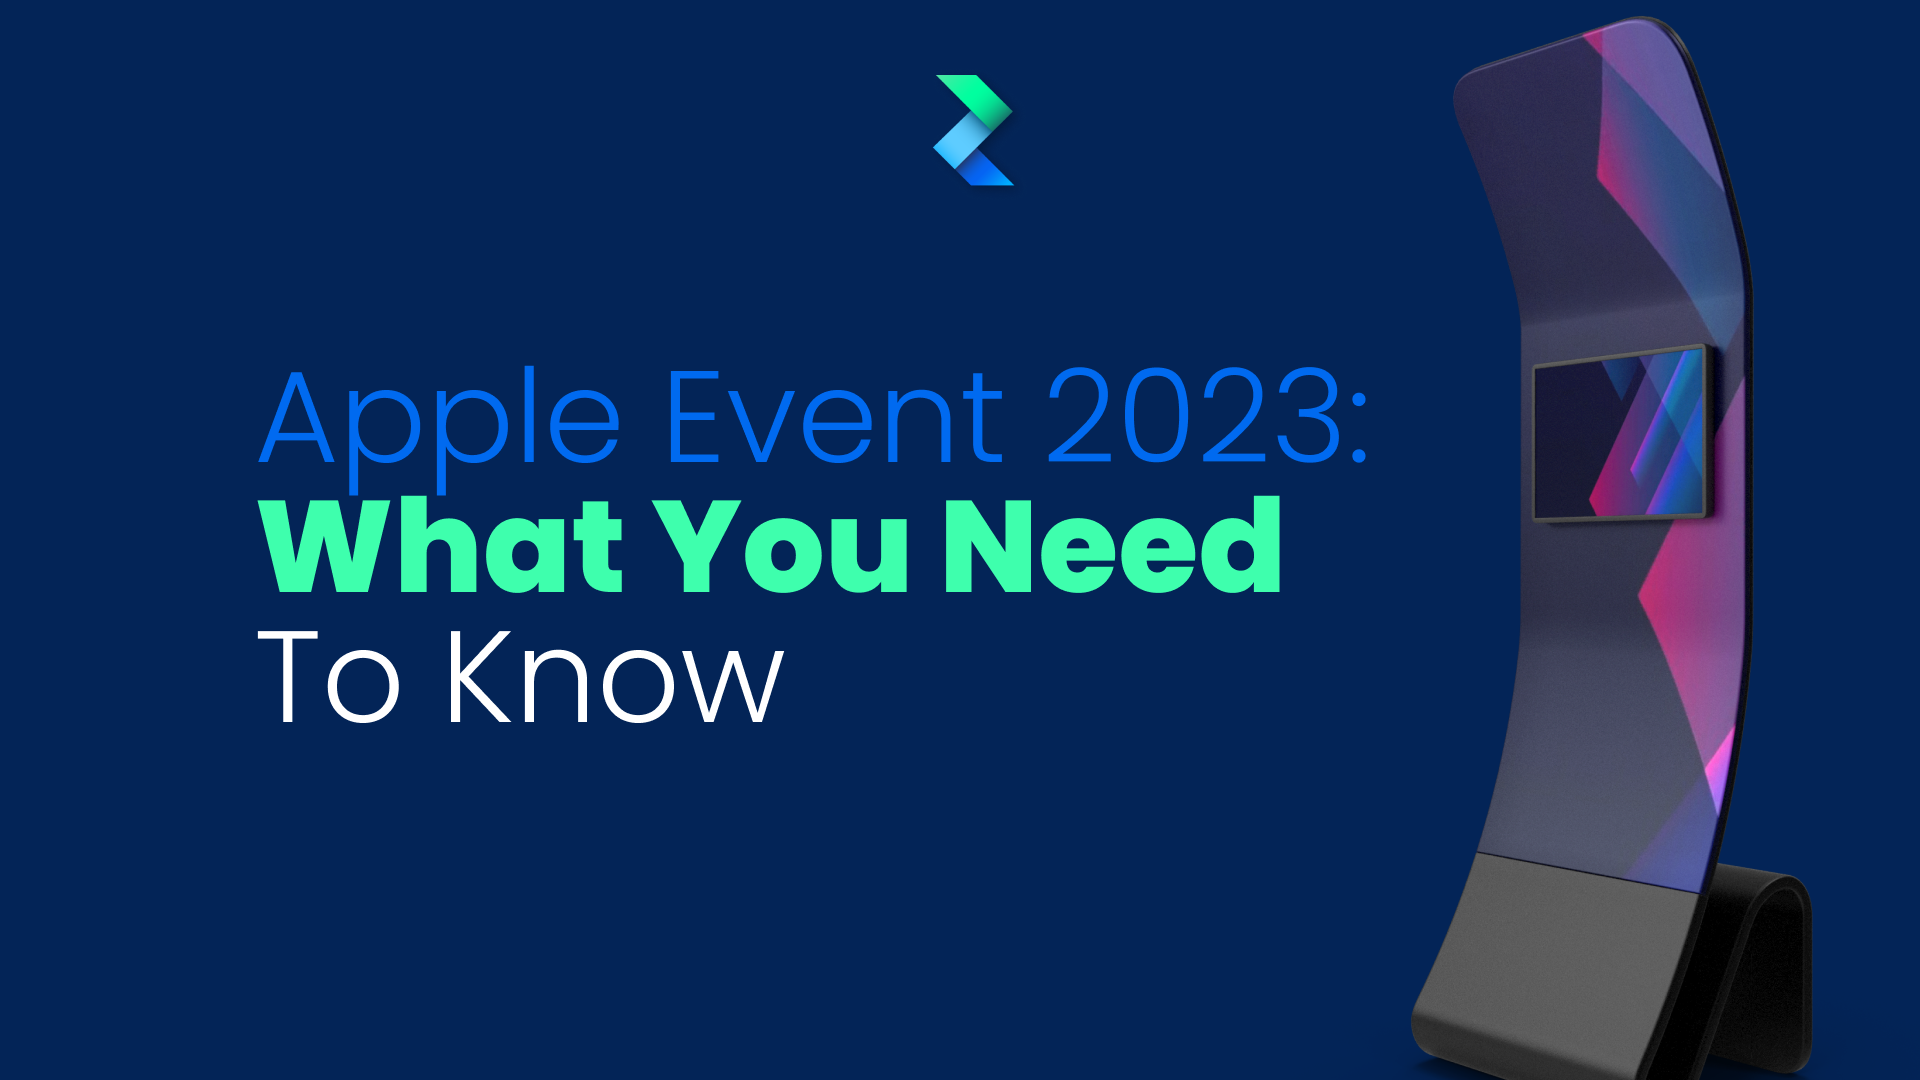 Apple Event 2023: What You Need to Know